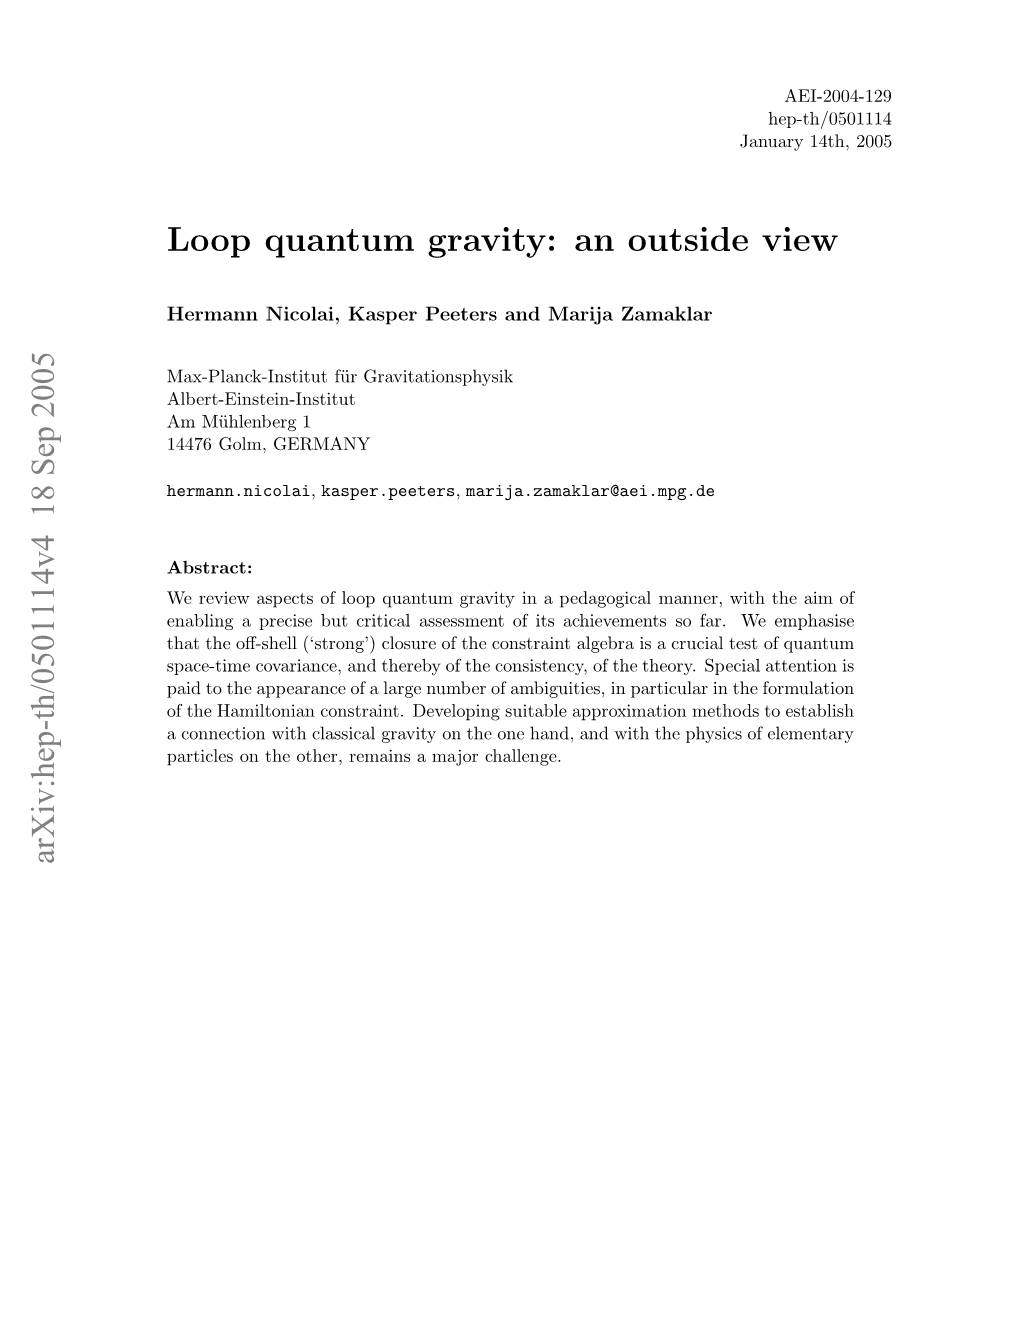 Loop Quantum Gravity: an Outside View